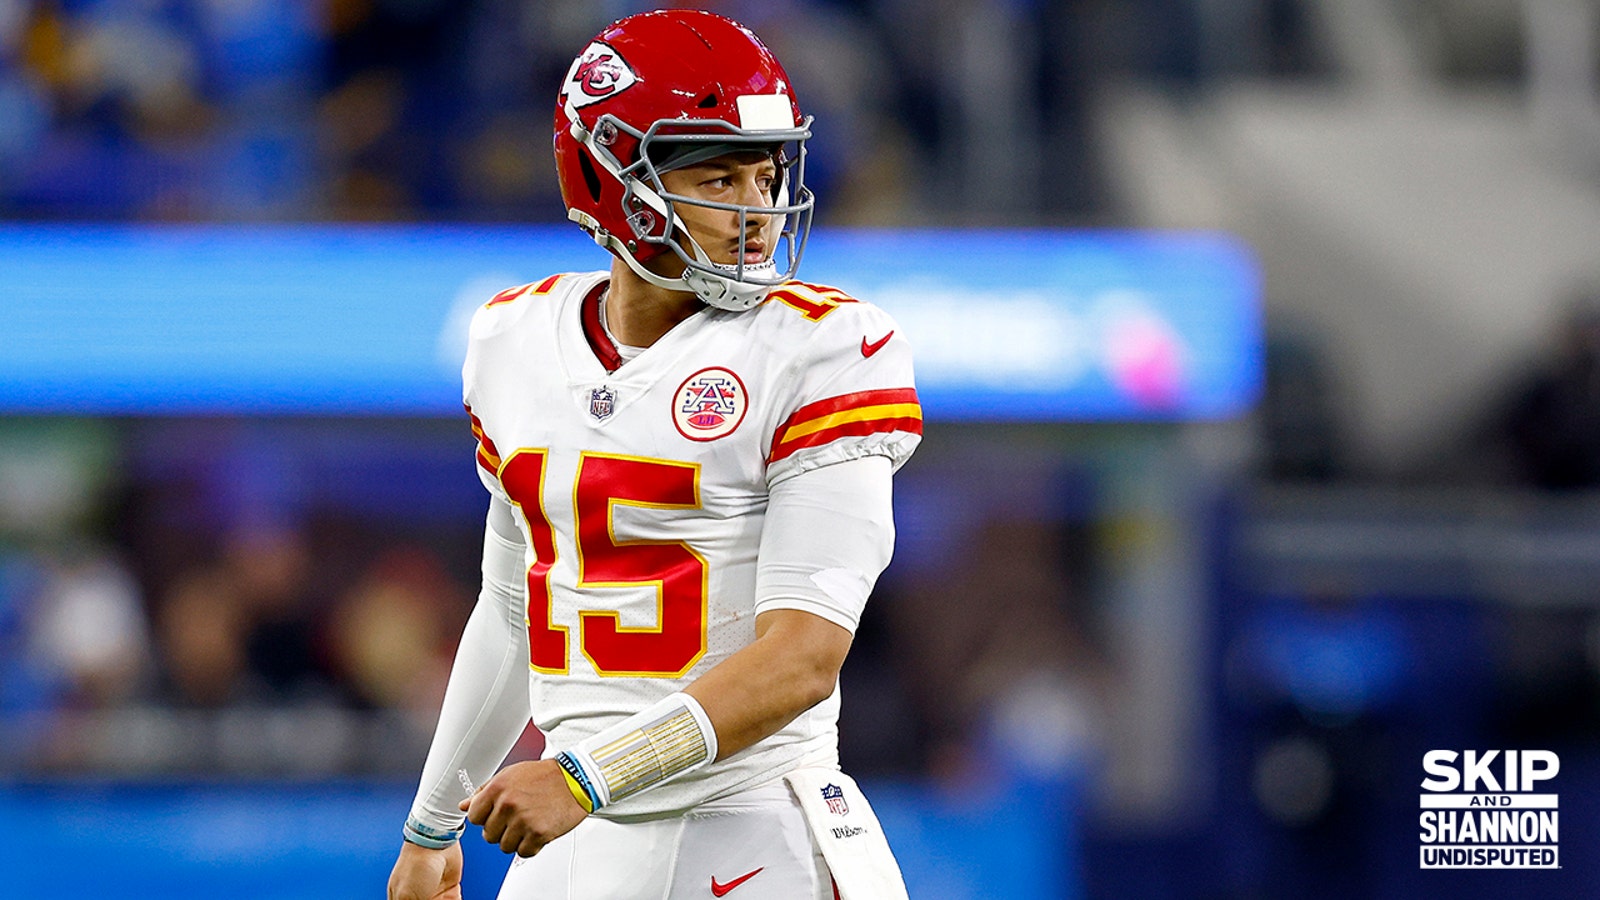 Patrick Mahomes criticized for playing 'street ball' by an NFL DC